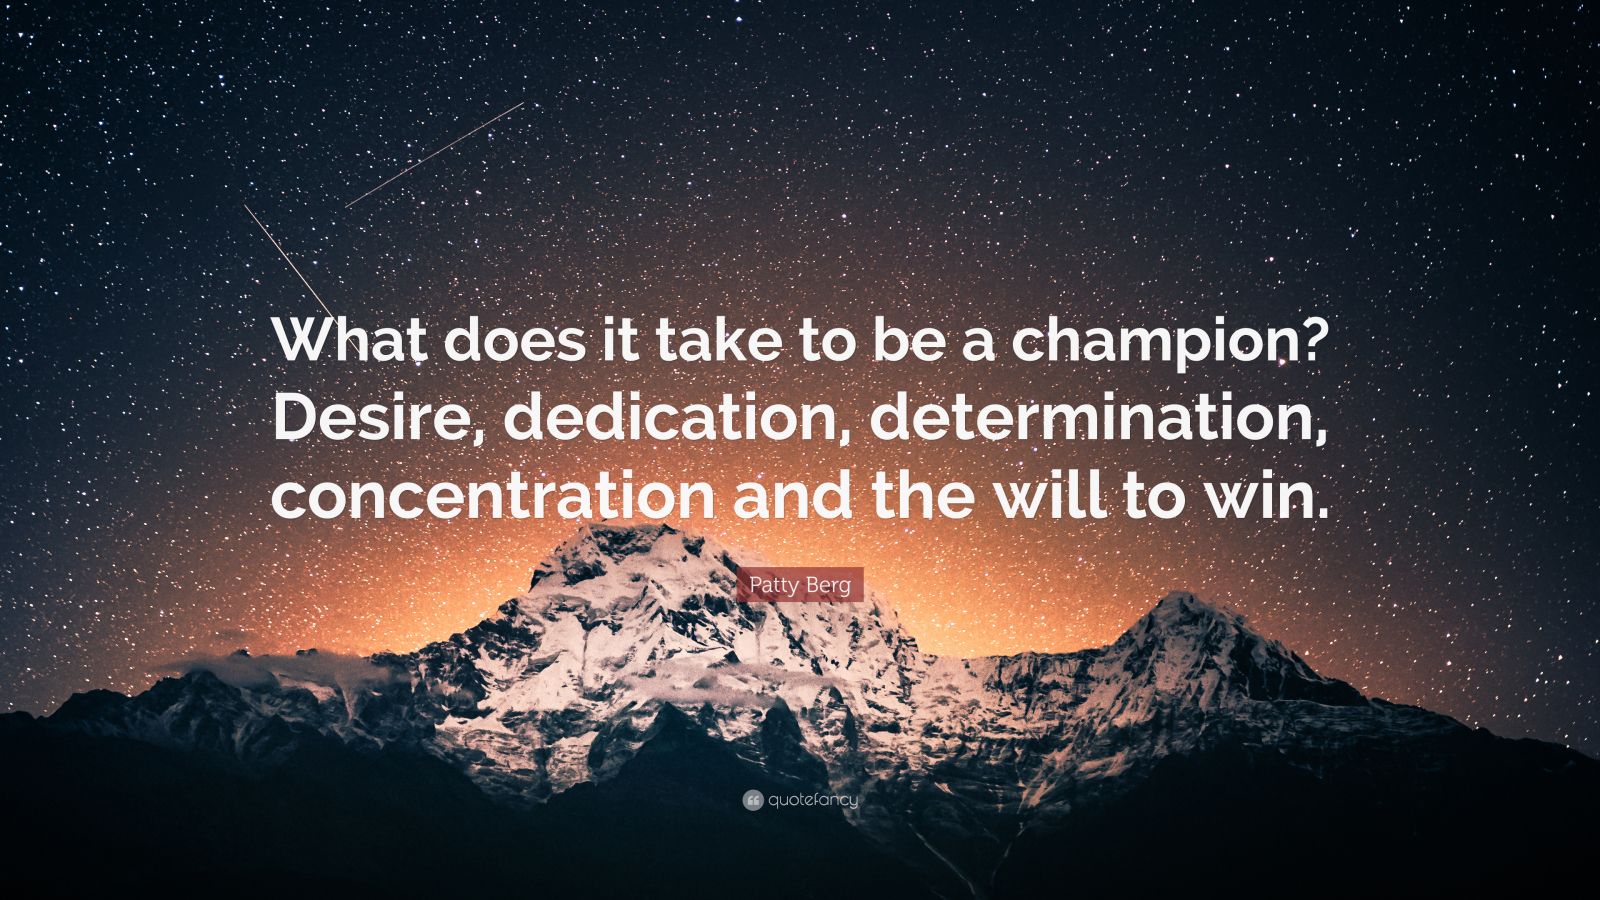 Patty Berg Quote: “What does it take to be a champion? Desire ...